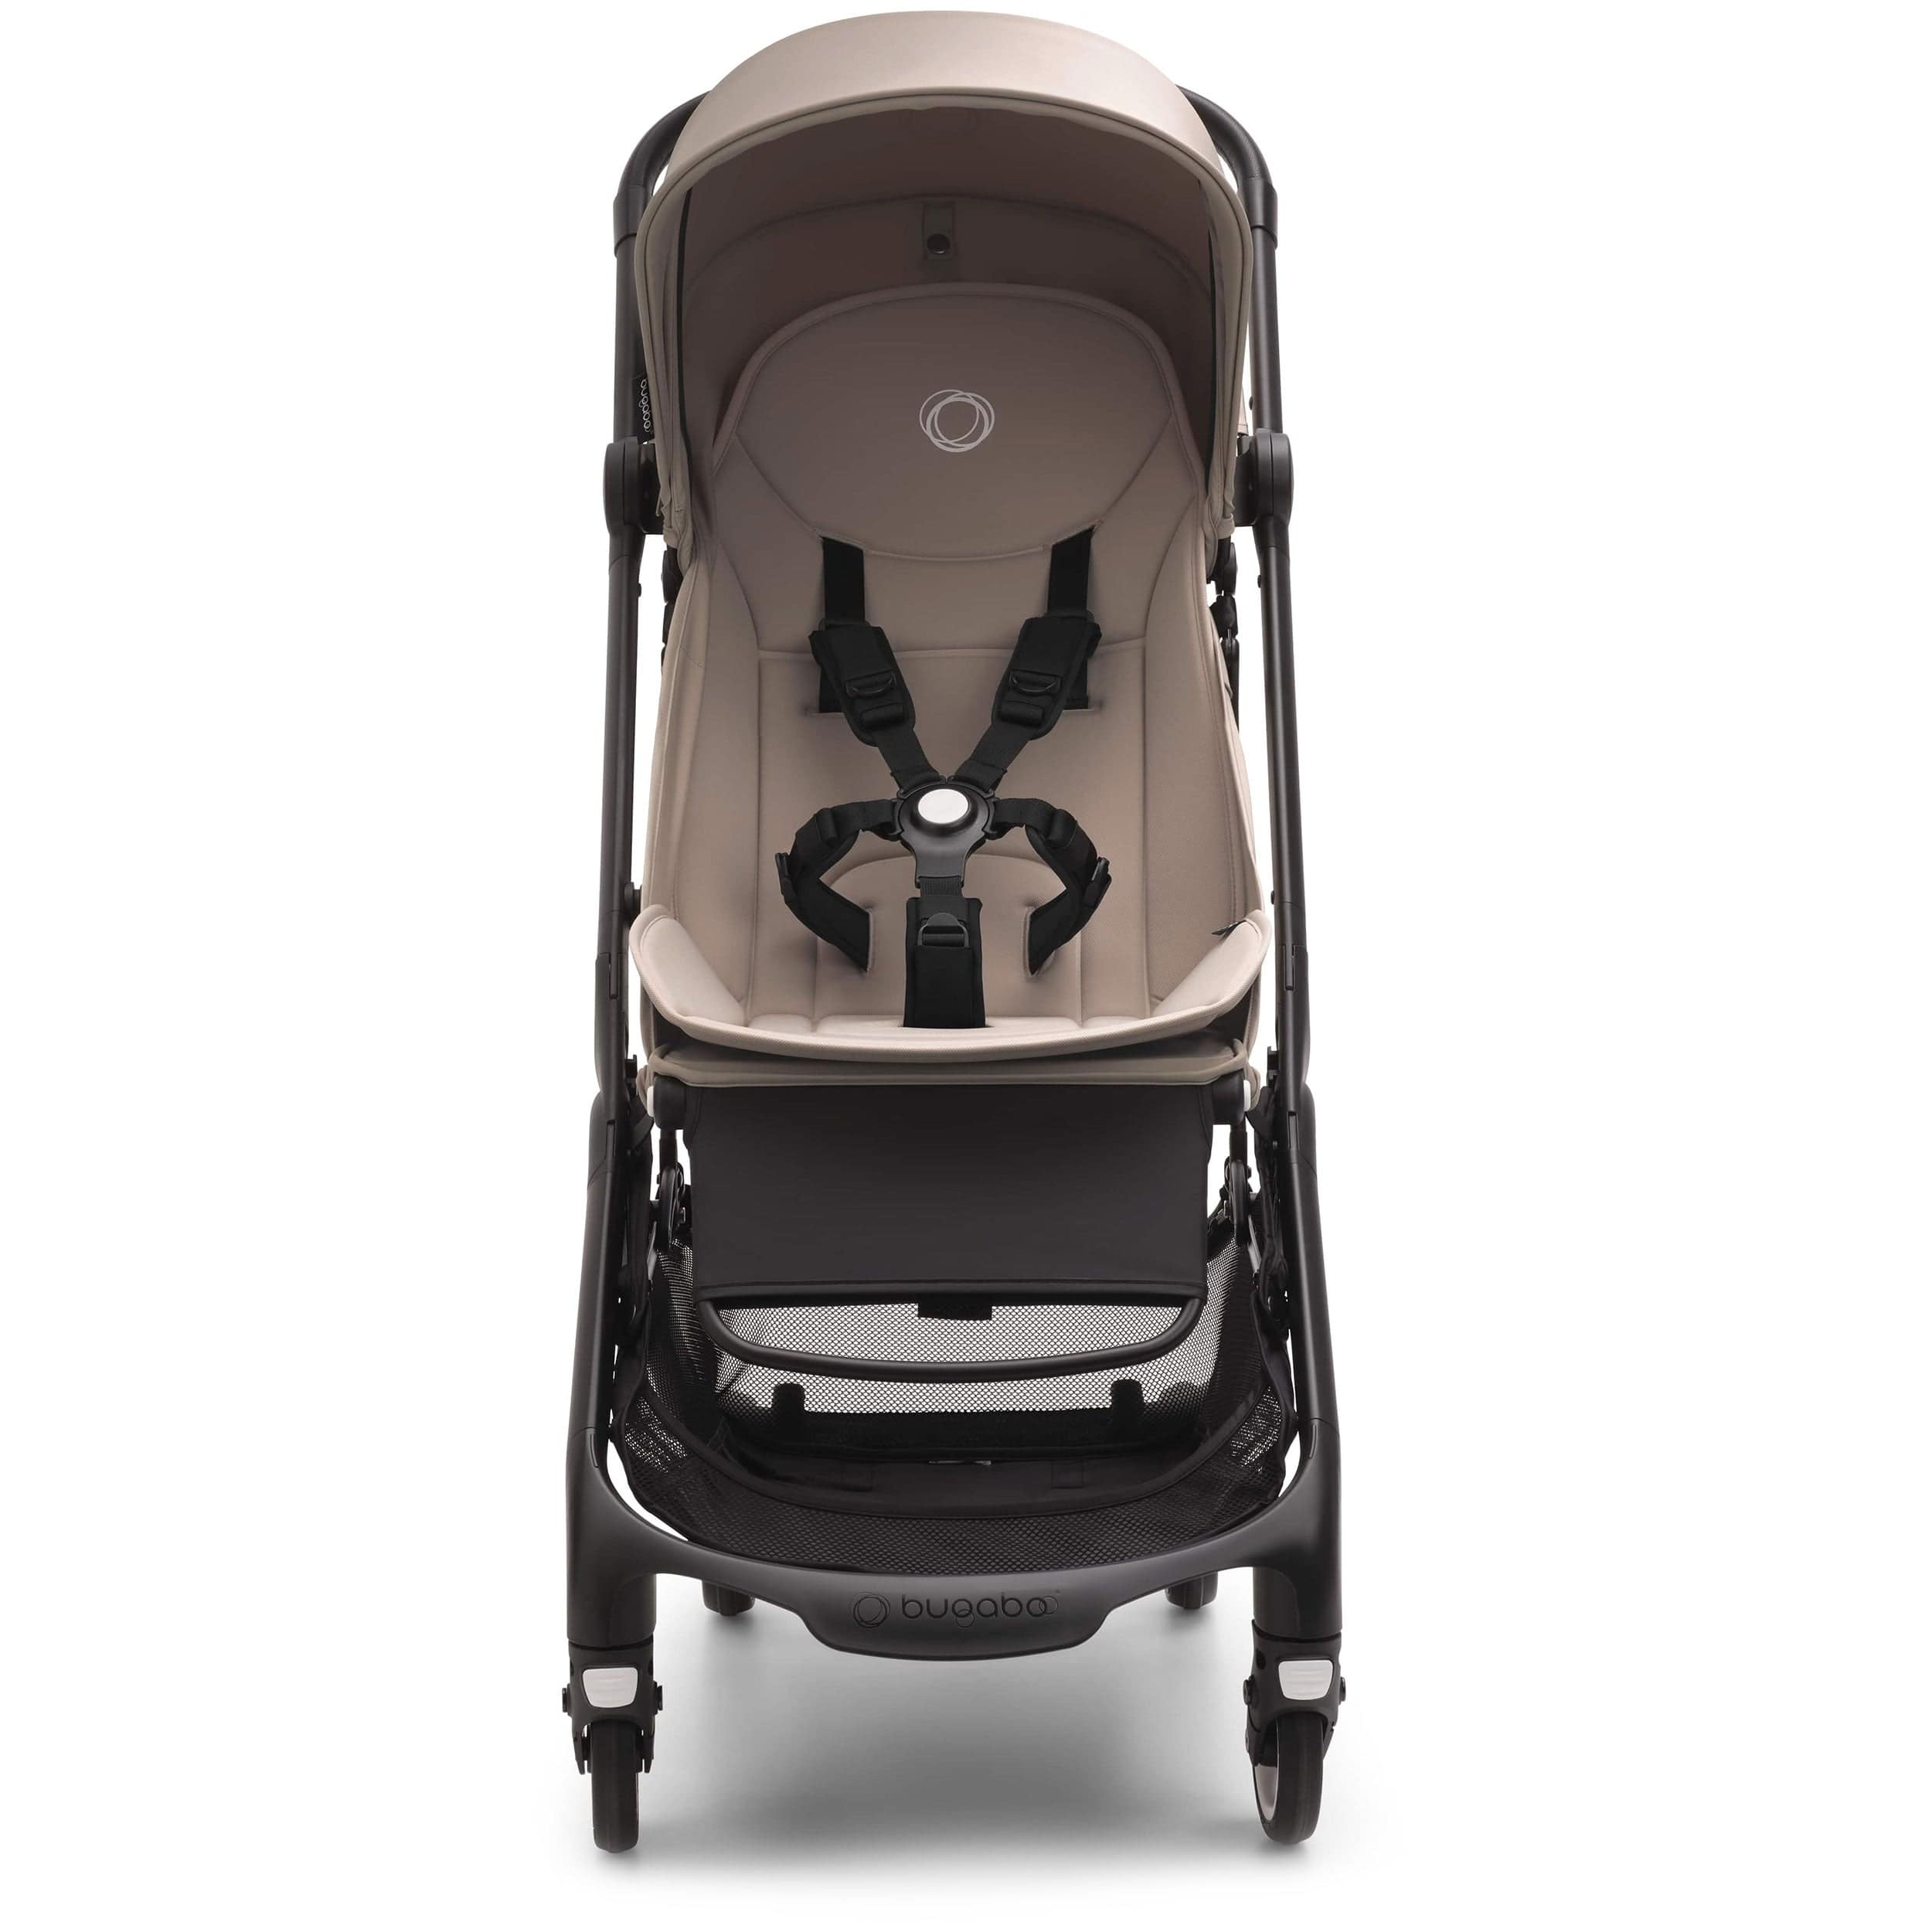 Bugaboo Butterfly in Desert Taupe Pushchairs & Buggies 100025031 8717447505648